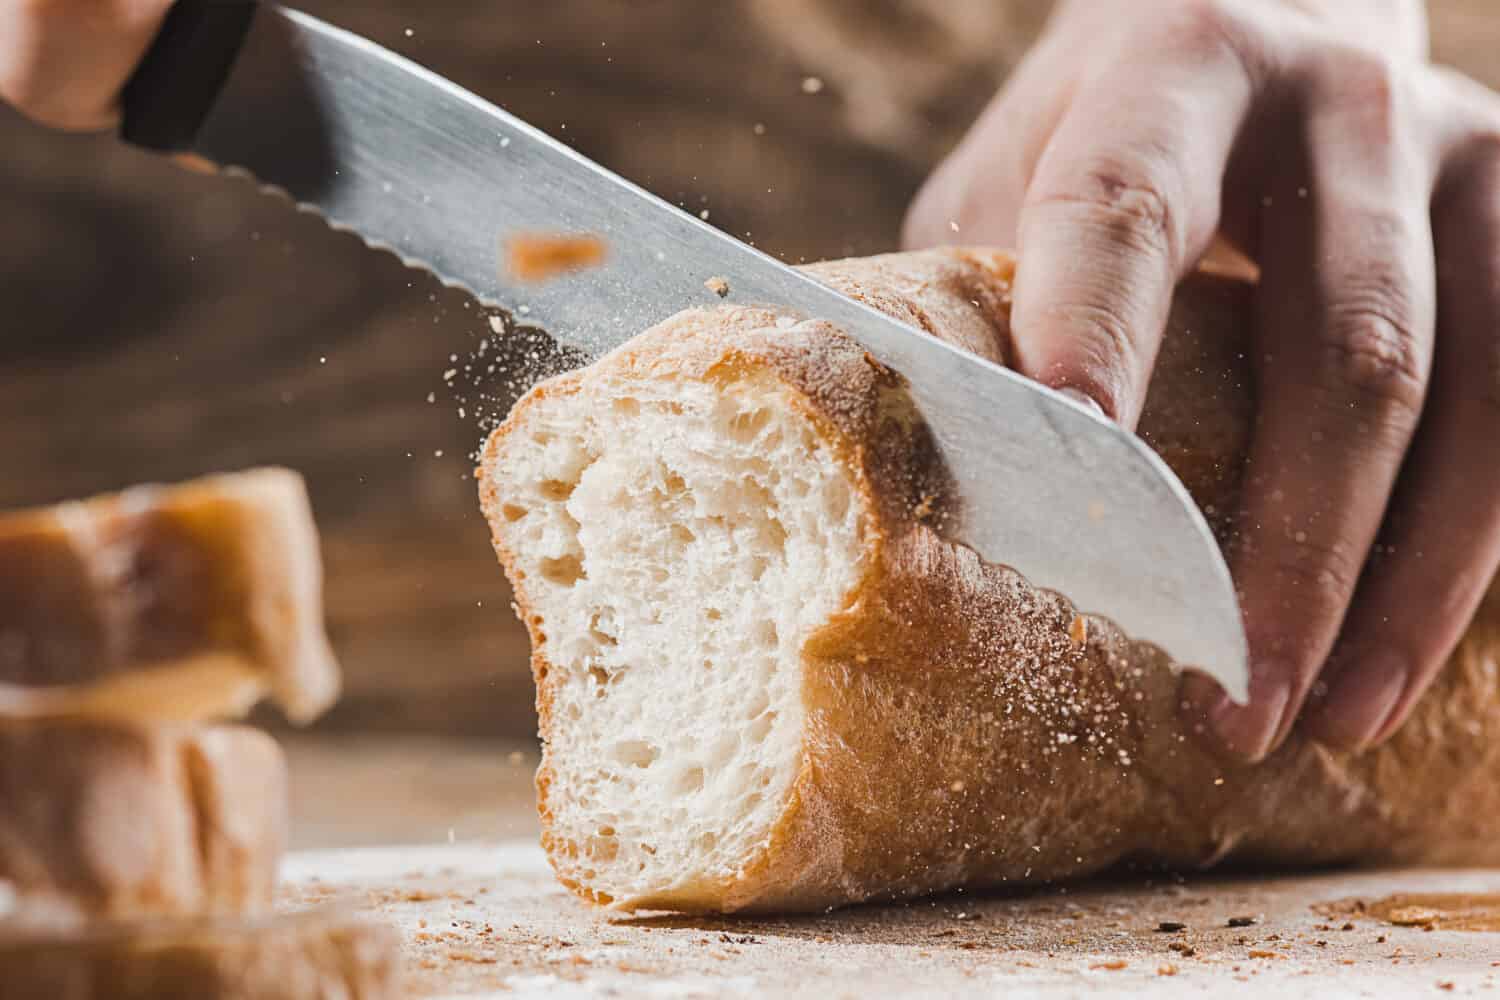 Whole grain bread put on kitchen wood plate with a chef holding gold knife for cut. Fresh bread on table close-up. Fresh bread on the kitchen table The healthy eating and traditional bakery concept